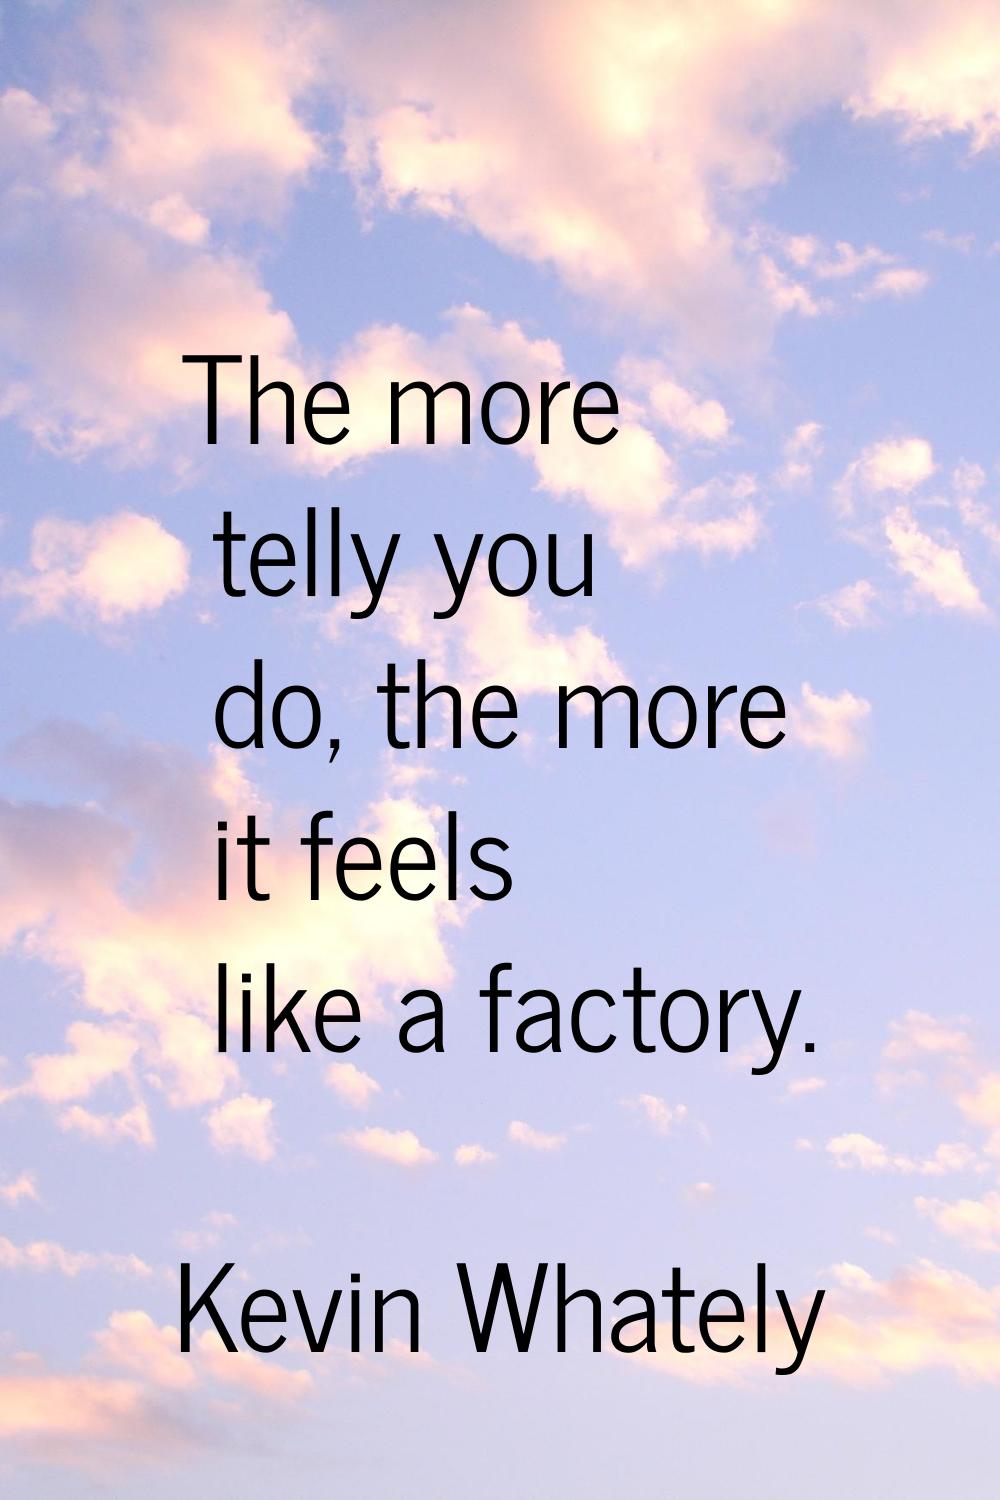 The more telly you do, the more it feels like a factory.